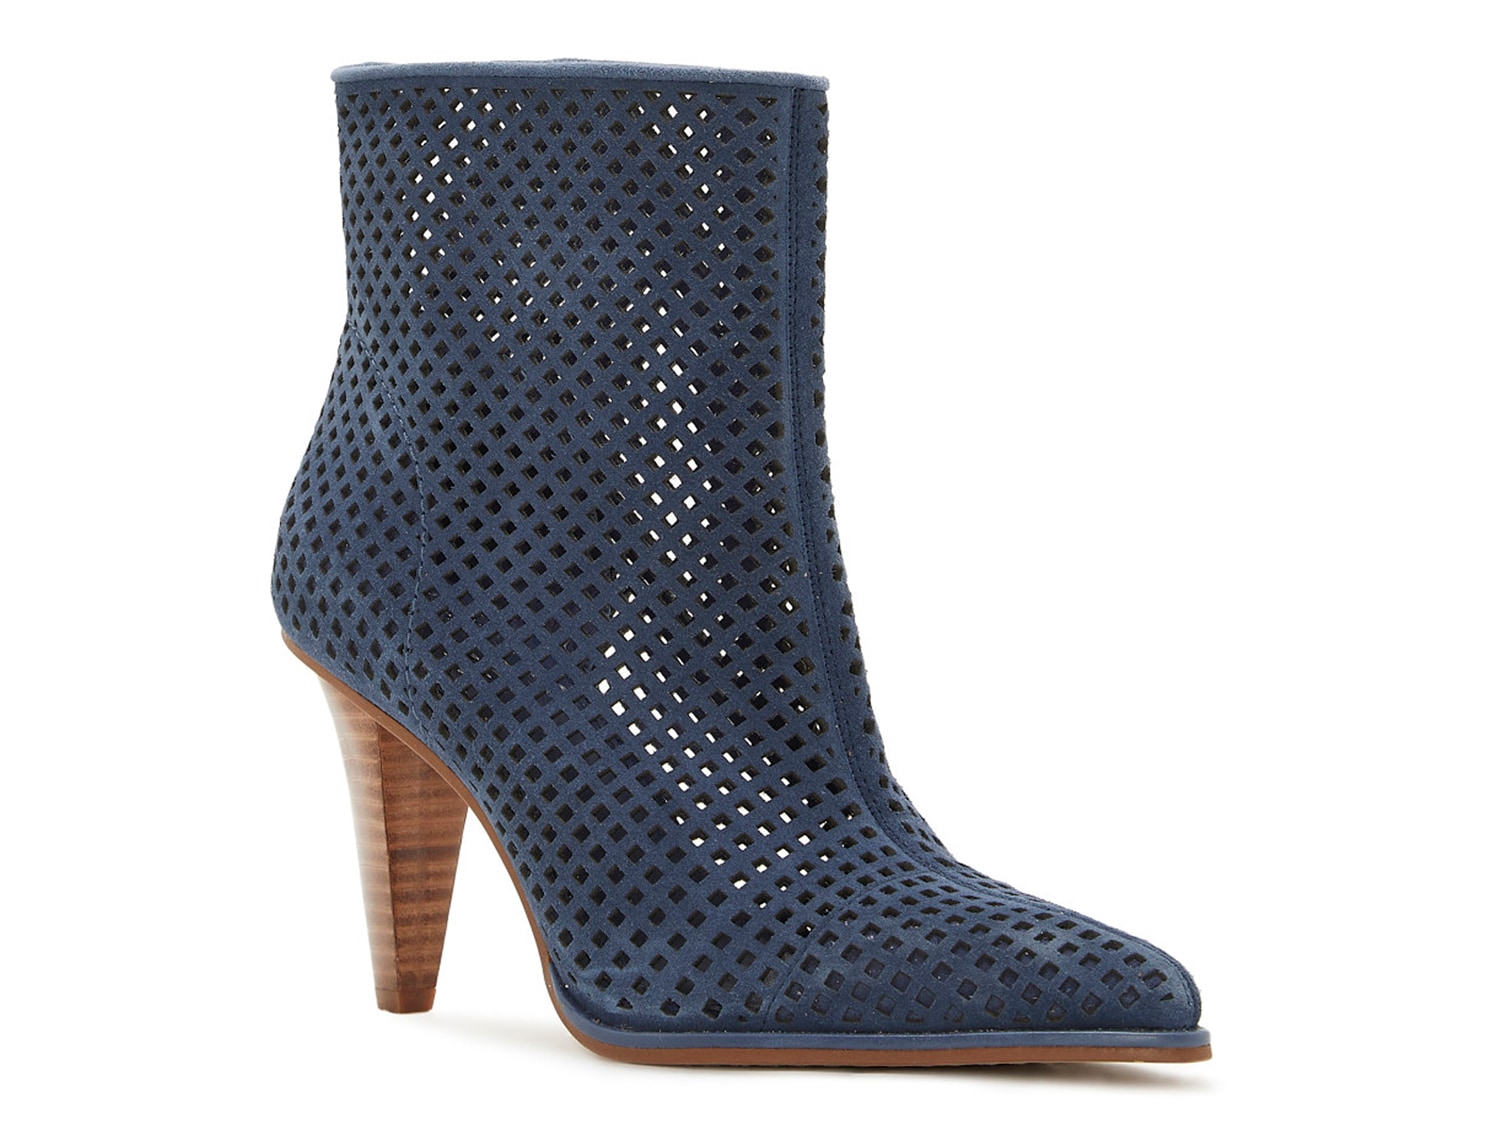 Vince Camuto Yolandal Bootie - Free Shipping | DSW